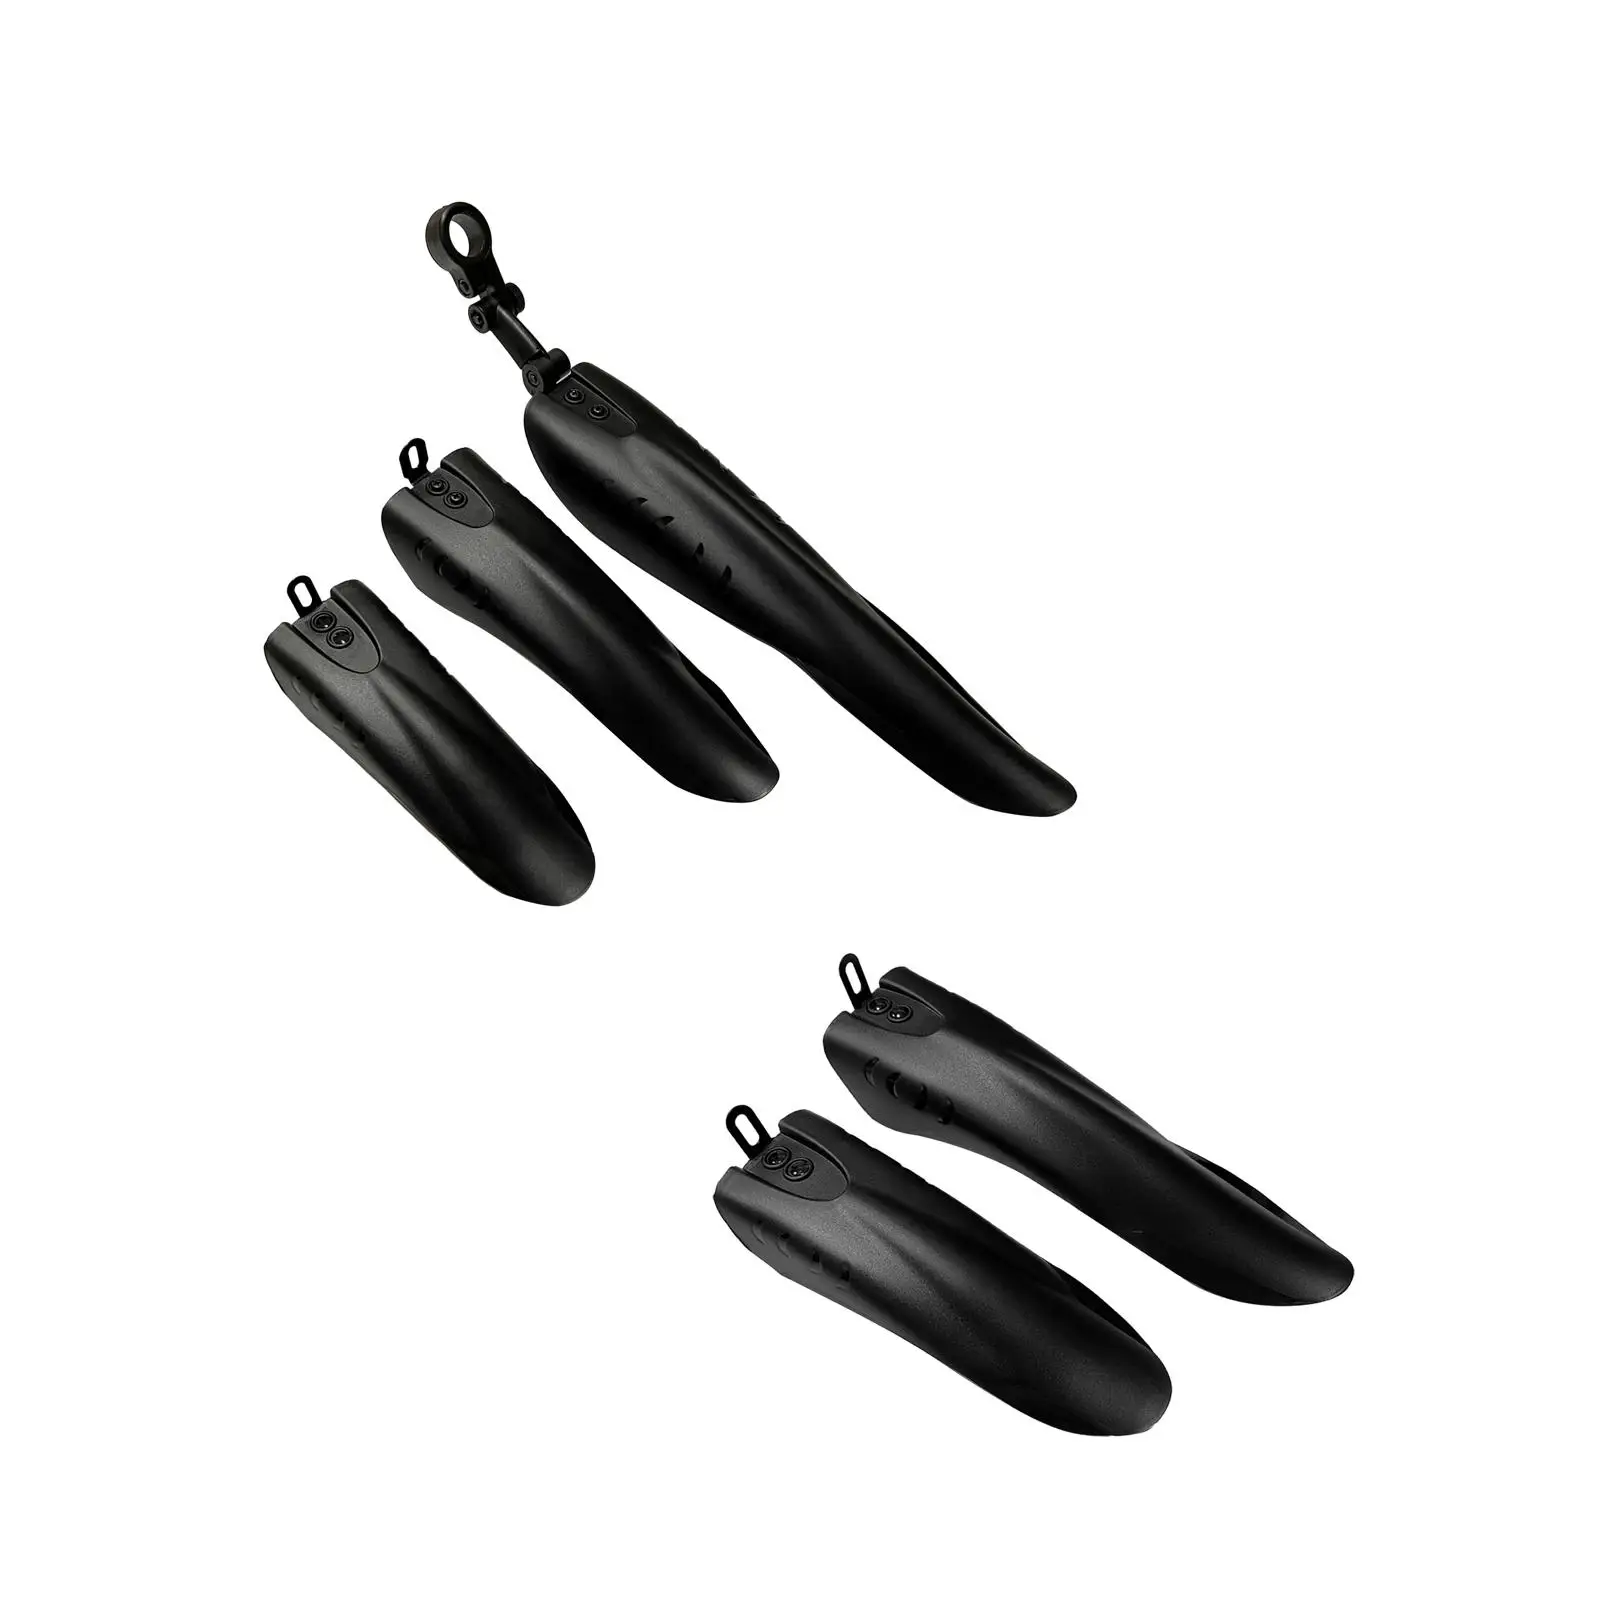 Bike Mudguard Front Rear Set Sturdy Supplies Replacement Accs Easy to Install Fenders for Outdoor Mountain Bike Sports